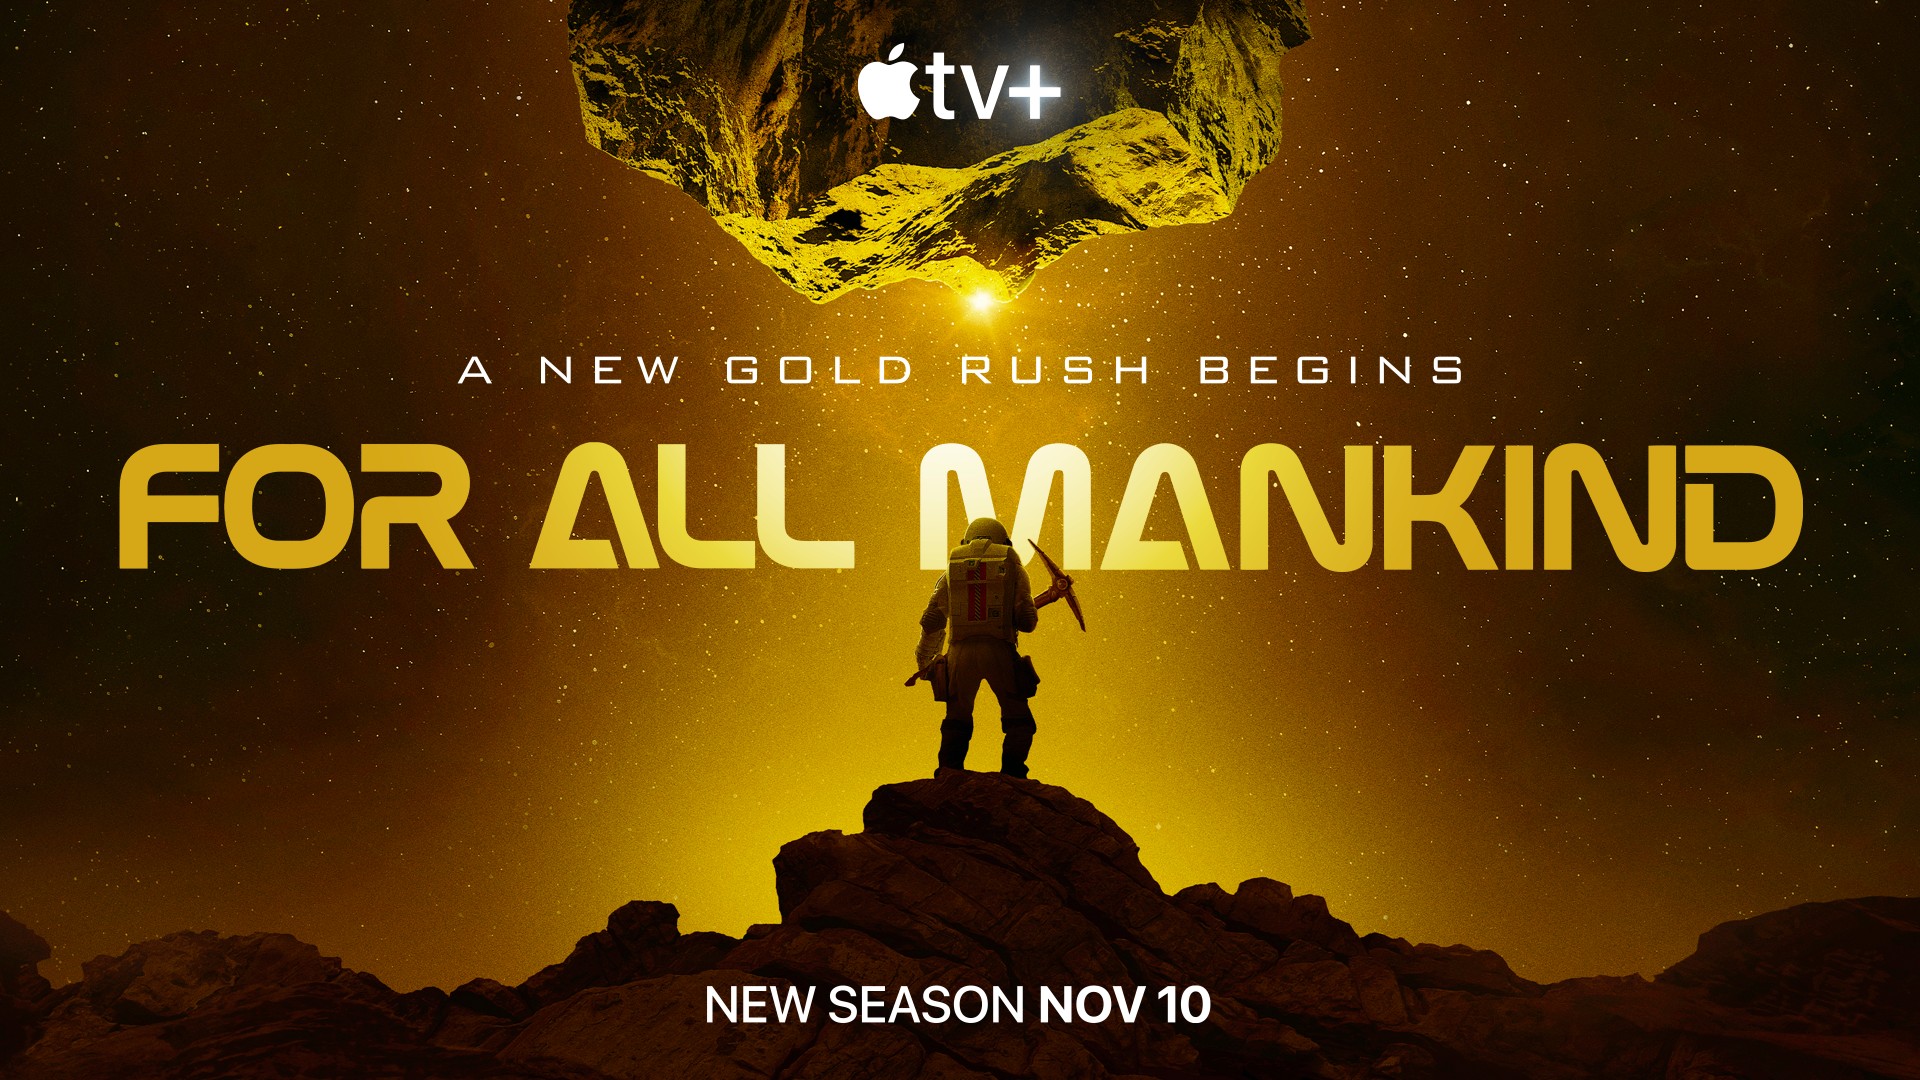  'For All Mankind' season 4 episode 1 review: Lots of moving parts but light on plot 